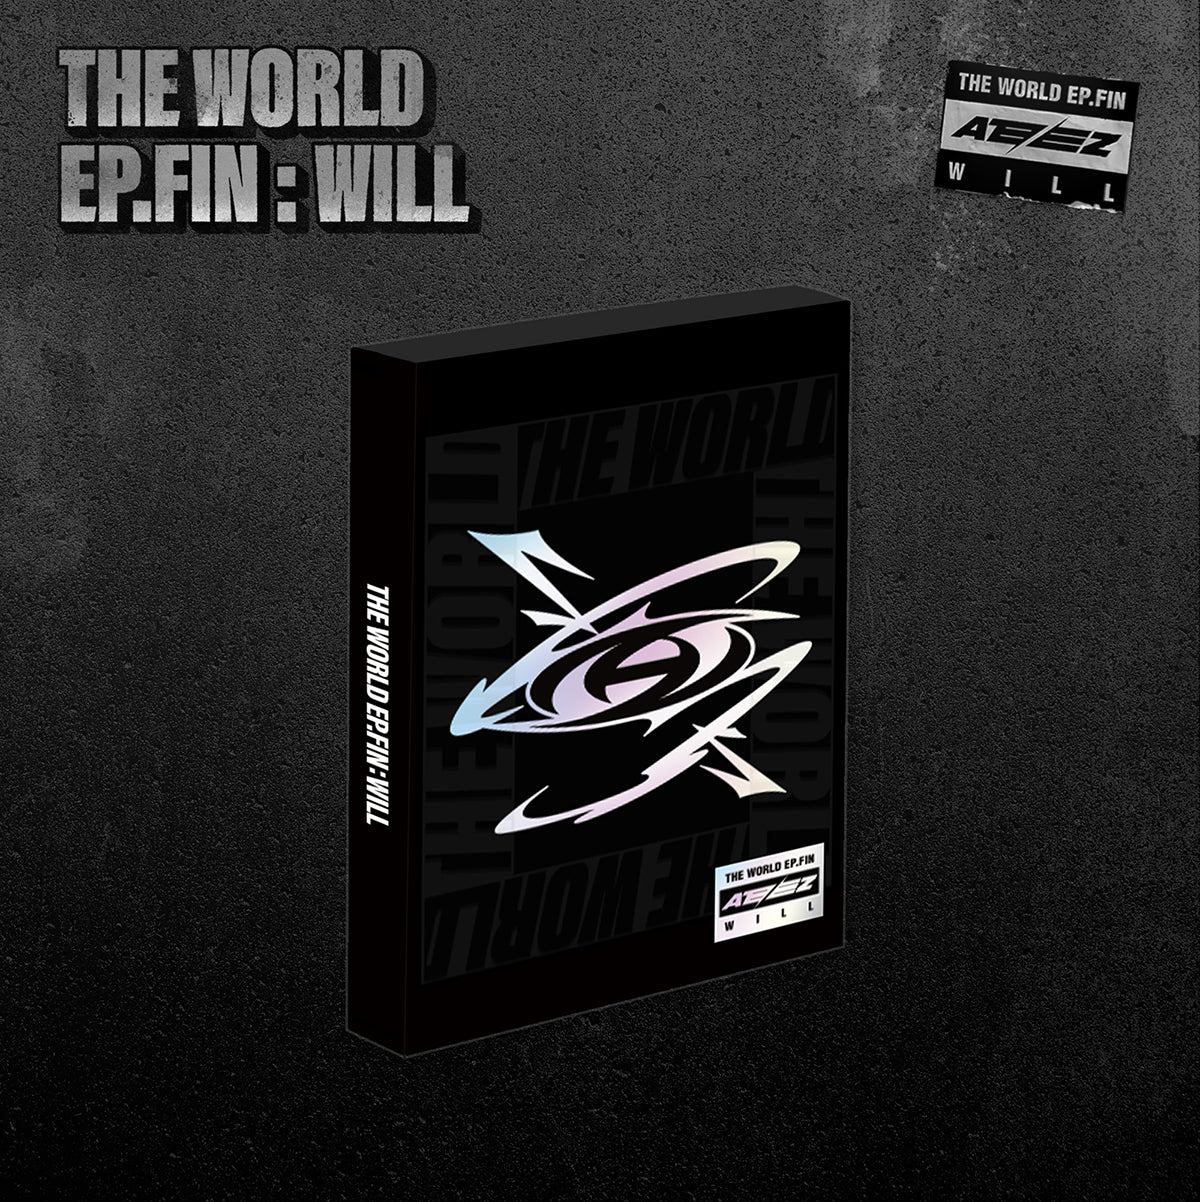 ATEEZ - THE WORLD EP.FIN : WILL (PLATFORM Ver.) [PRE-ORDER]